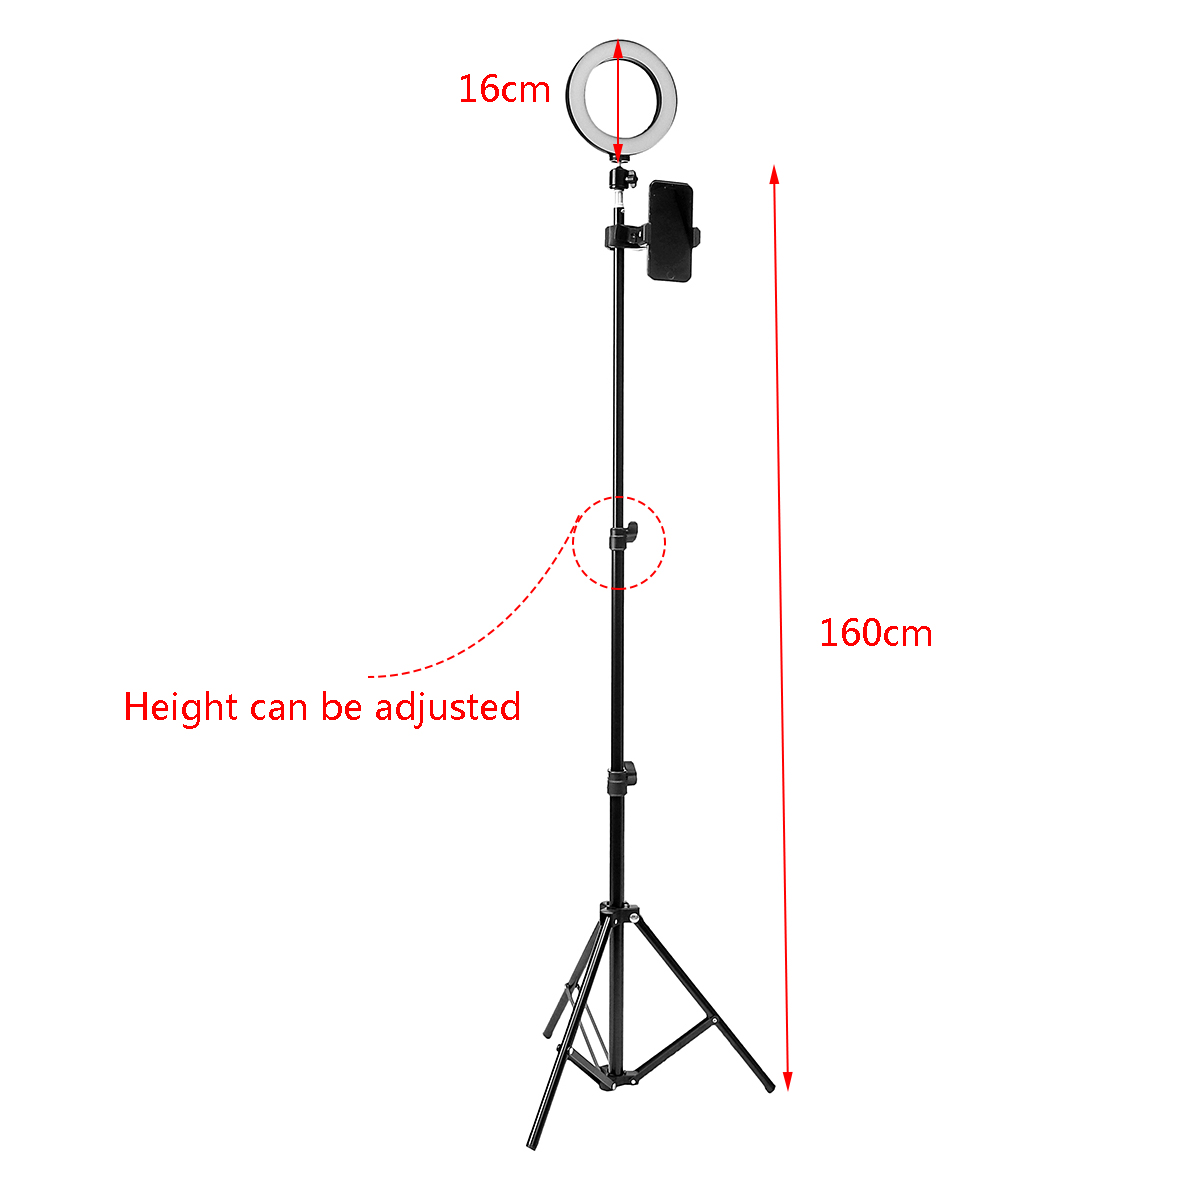 16cm-LED-Video-Ring-Light-5500K-Dimmable-with-160cm-Adjustable-Light-Stand-for-Youtube-Tiktok-Live-S-1403937